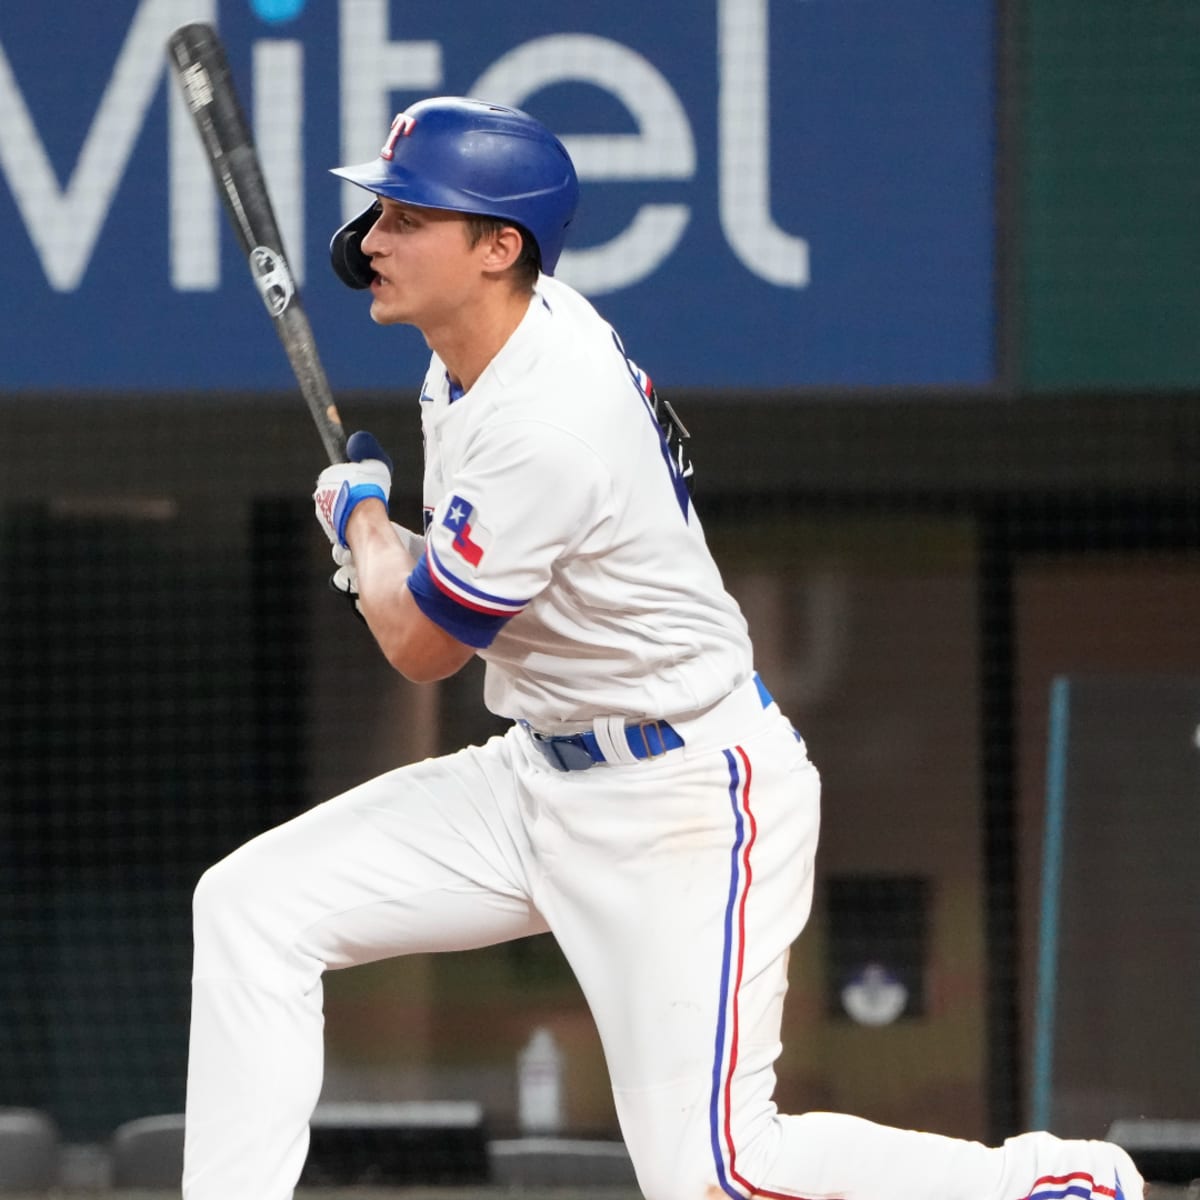 Rangers' Seager intentionally walked with bases loaded